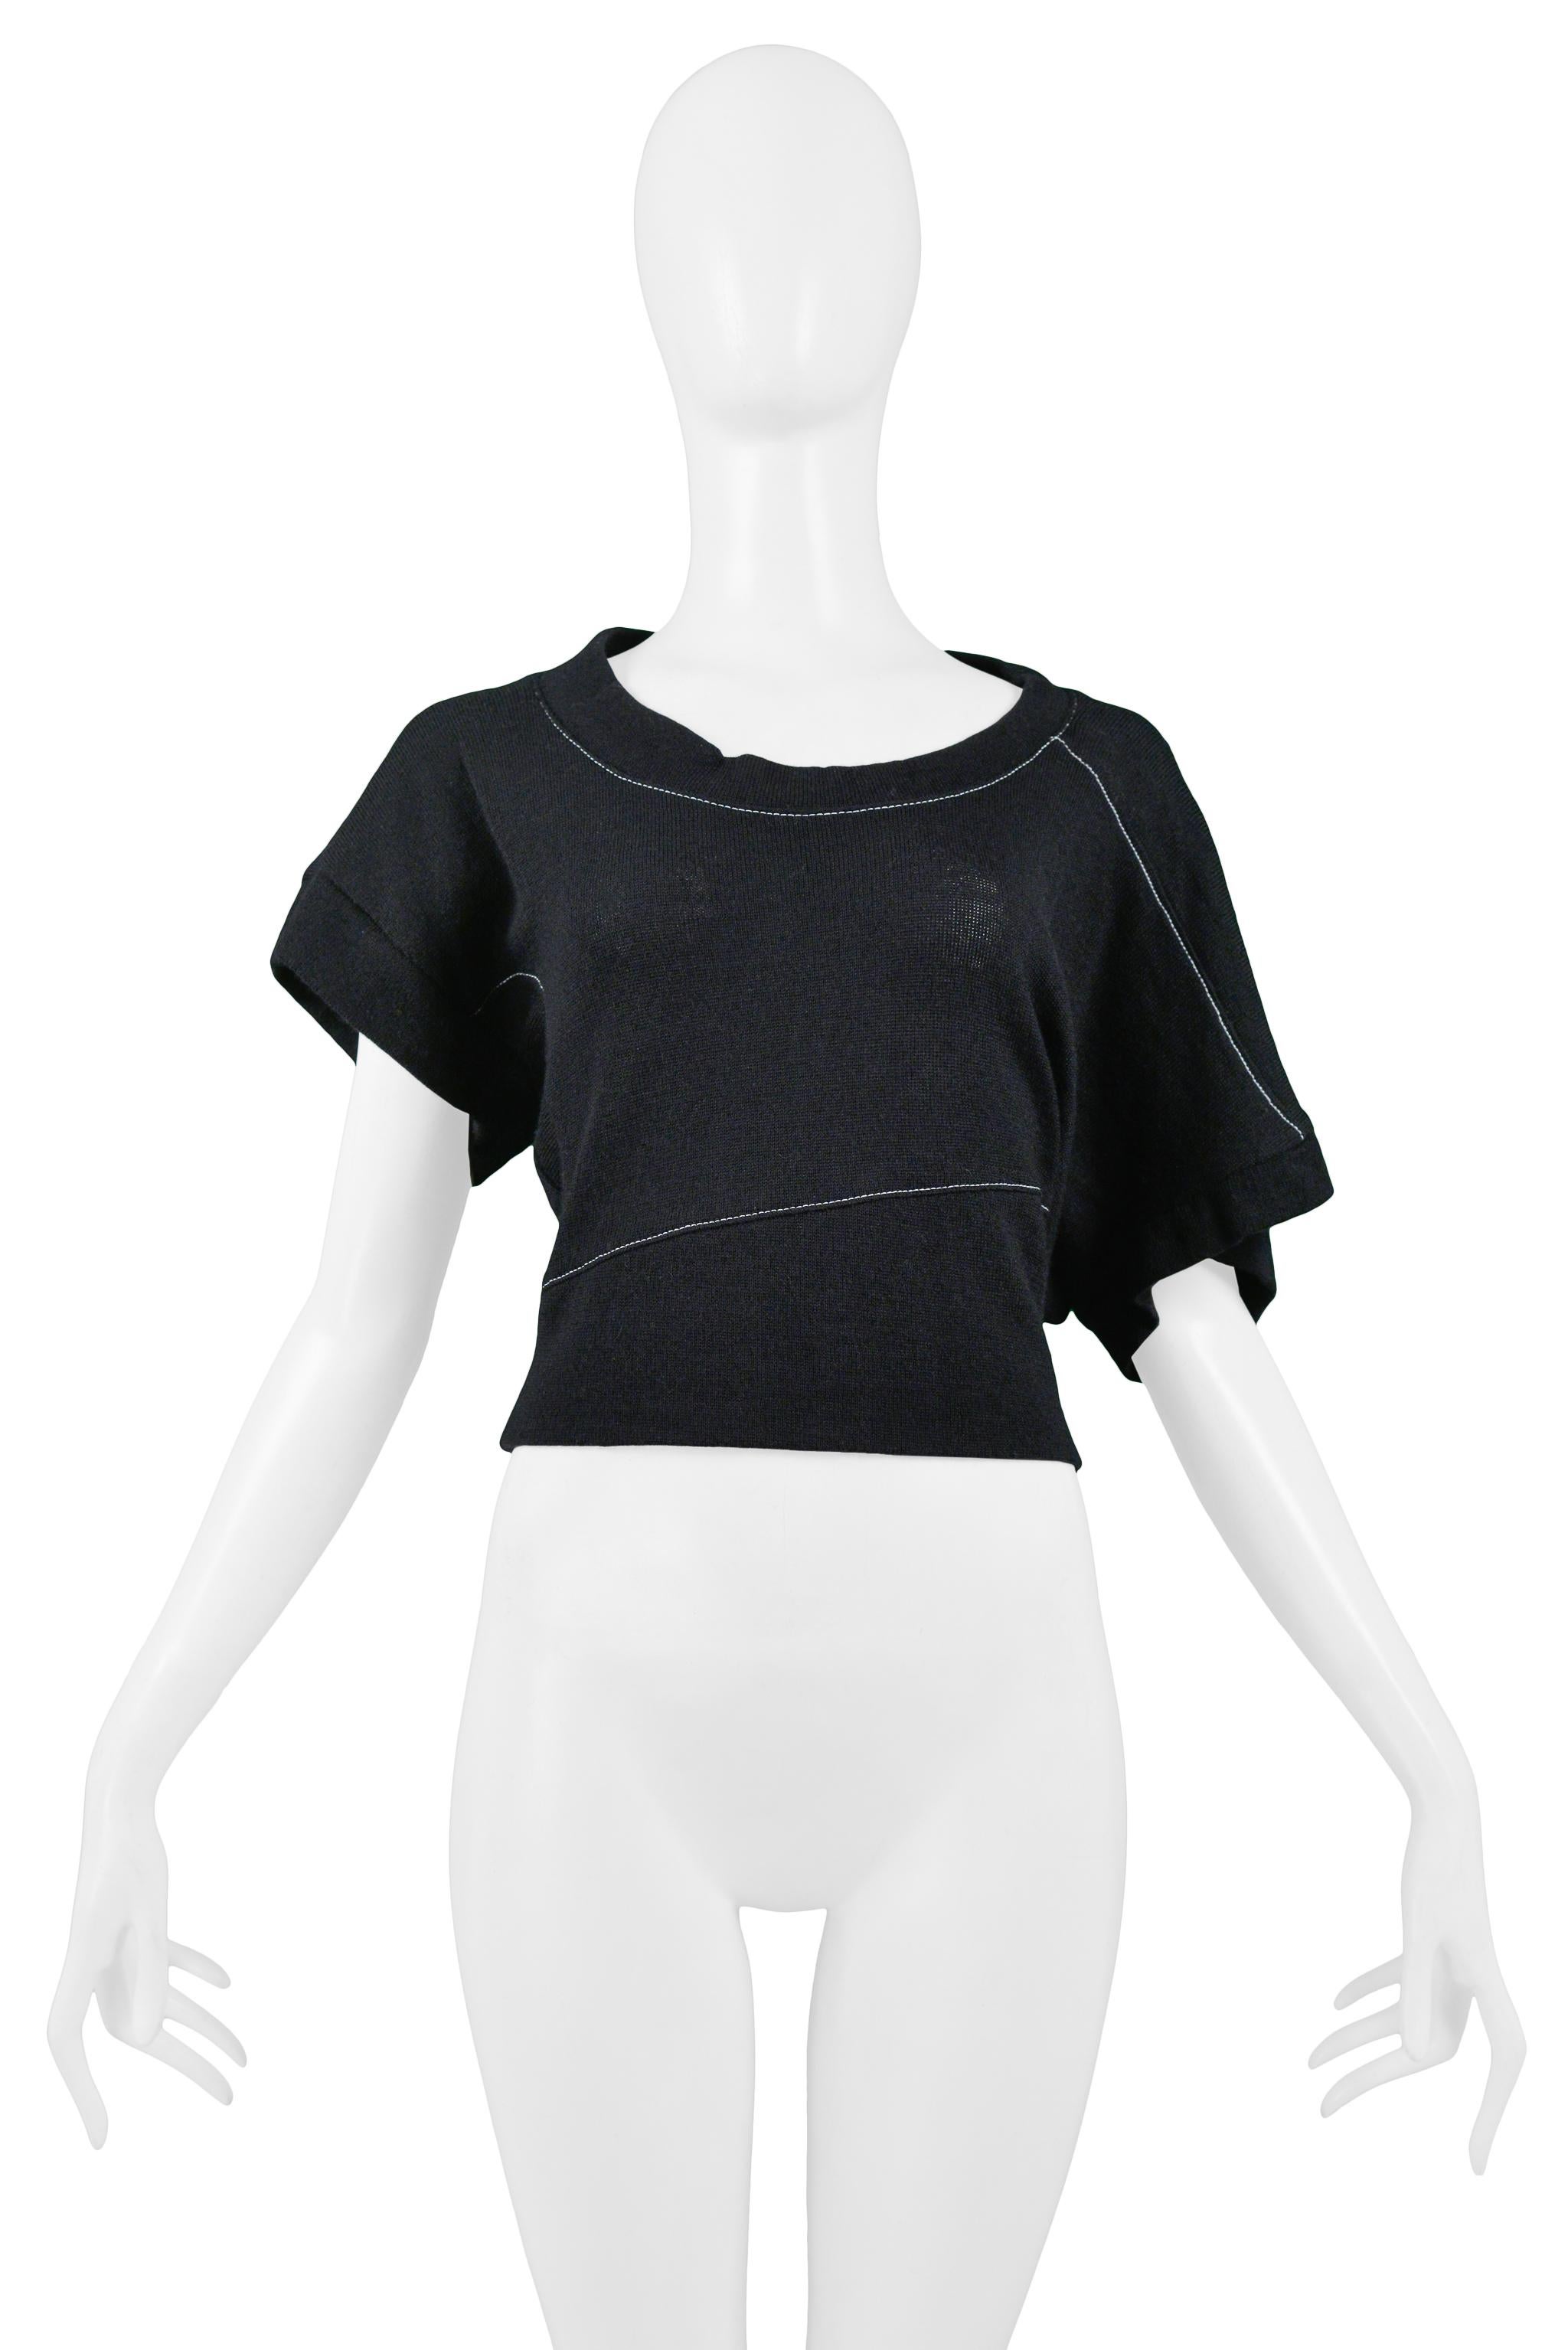 Vintage Balenciaga by Nicolas Ghesquiere black wool short sleeve sweater featuring contrasting white stitching, a scoop neckline, and asymmetrical sleeves. 2002 Collection. 
Balenciaga Label
Designed By Nicolas Ghesquiere
Size 42
100% Wool
2002